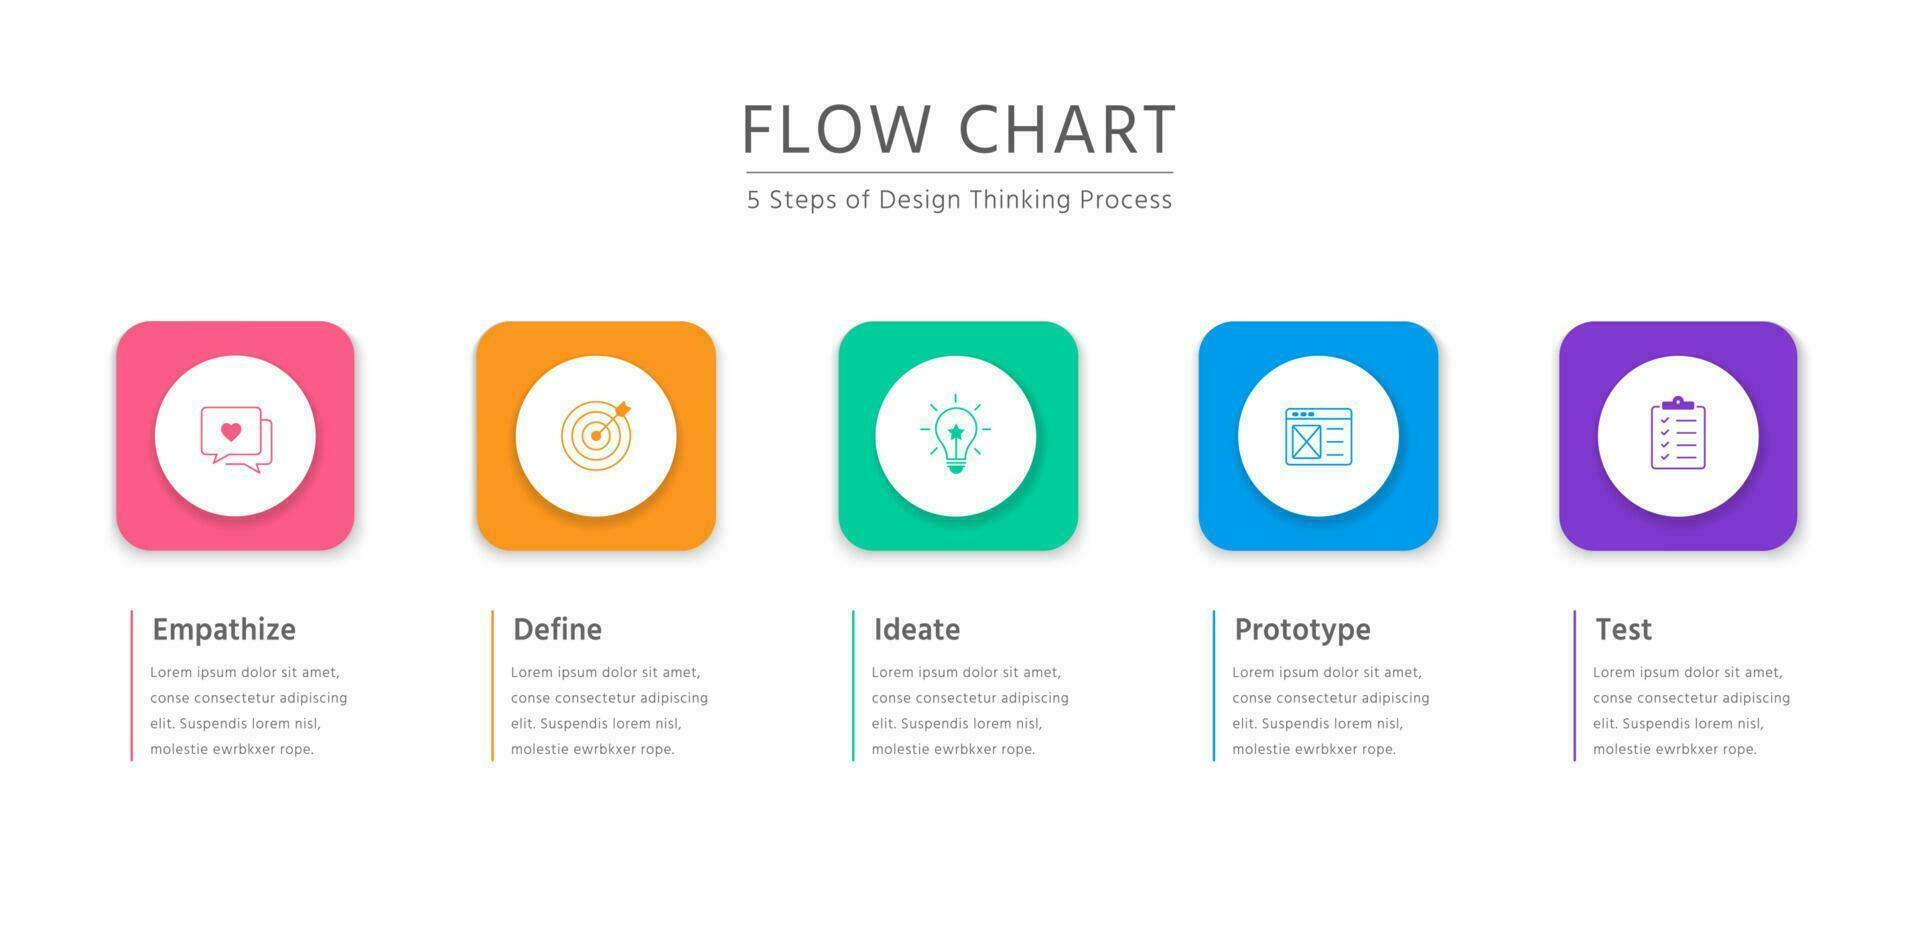 5 Steps of Design Thinking Process in horizontal colorful flow chart ...